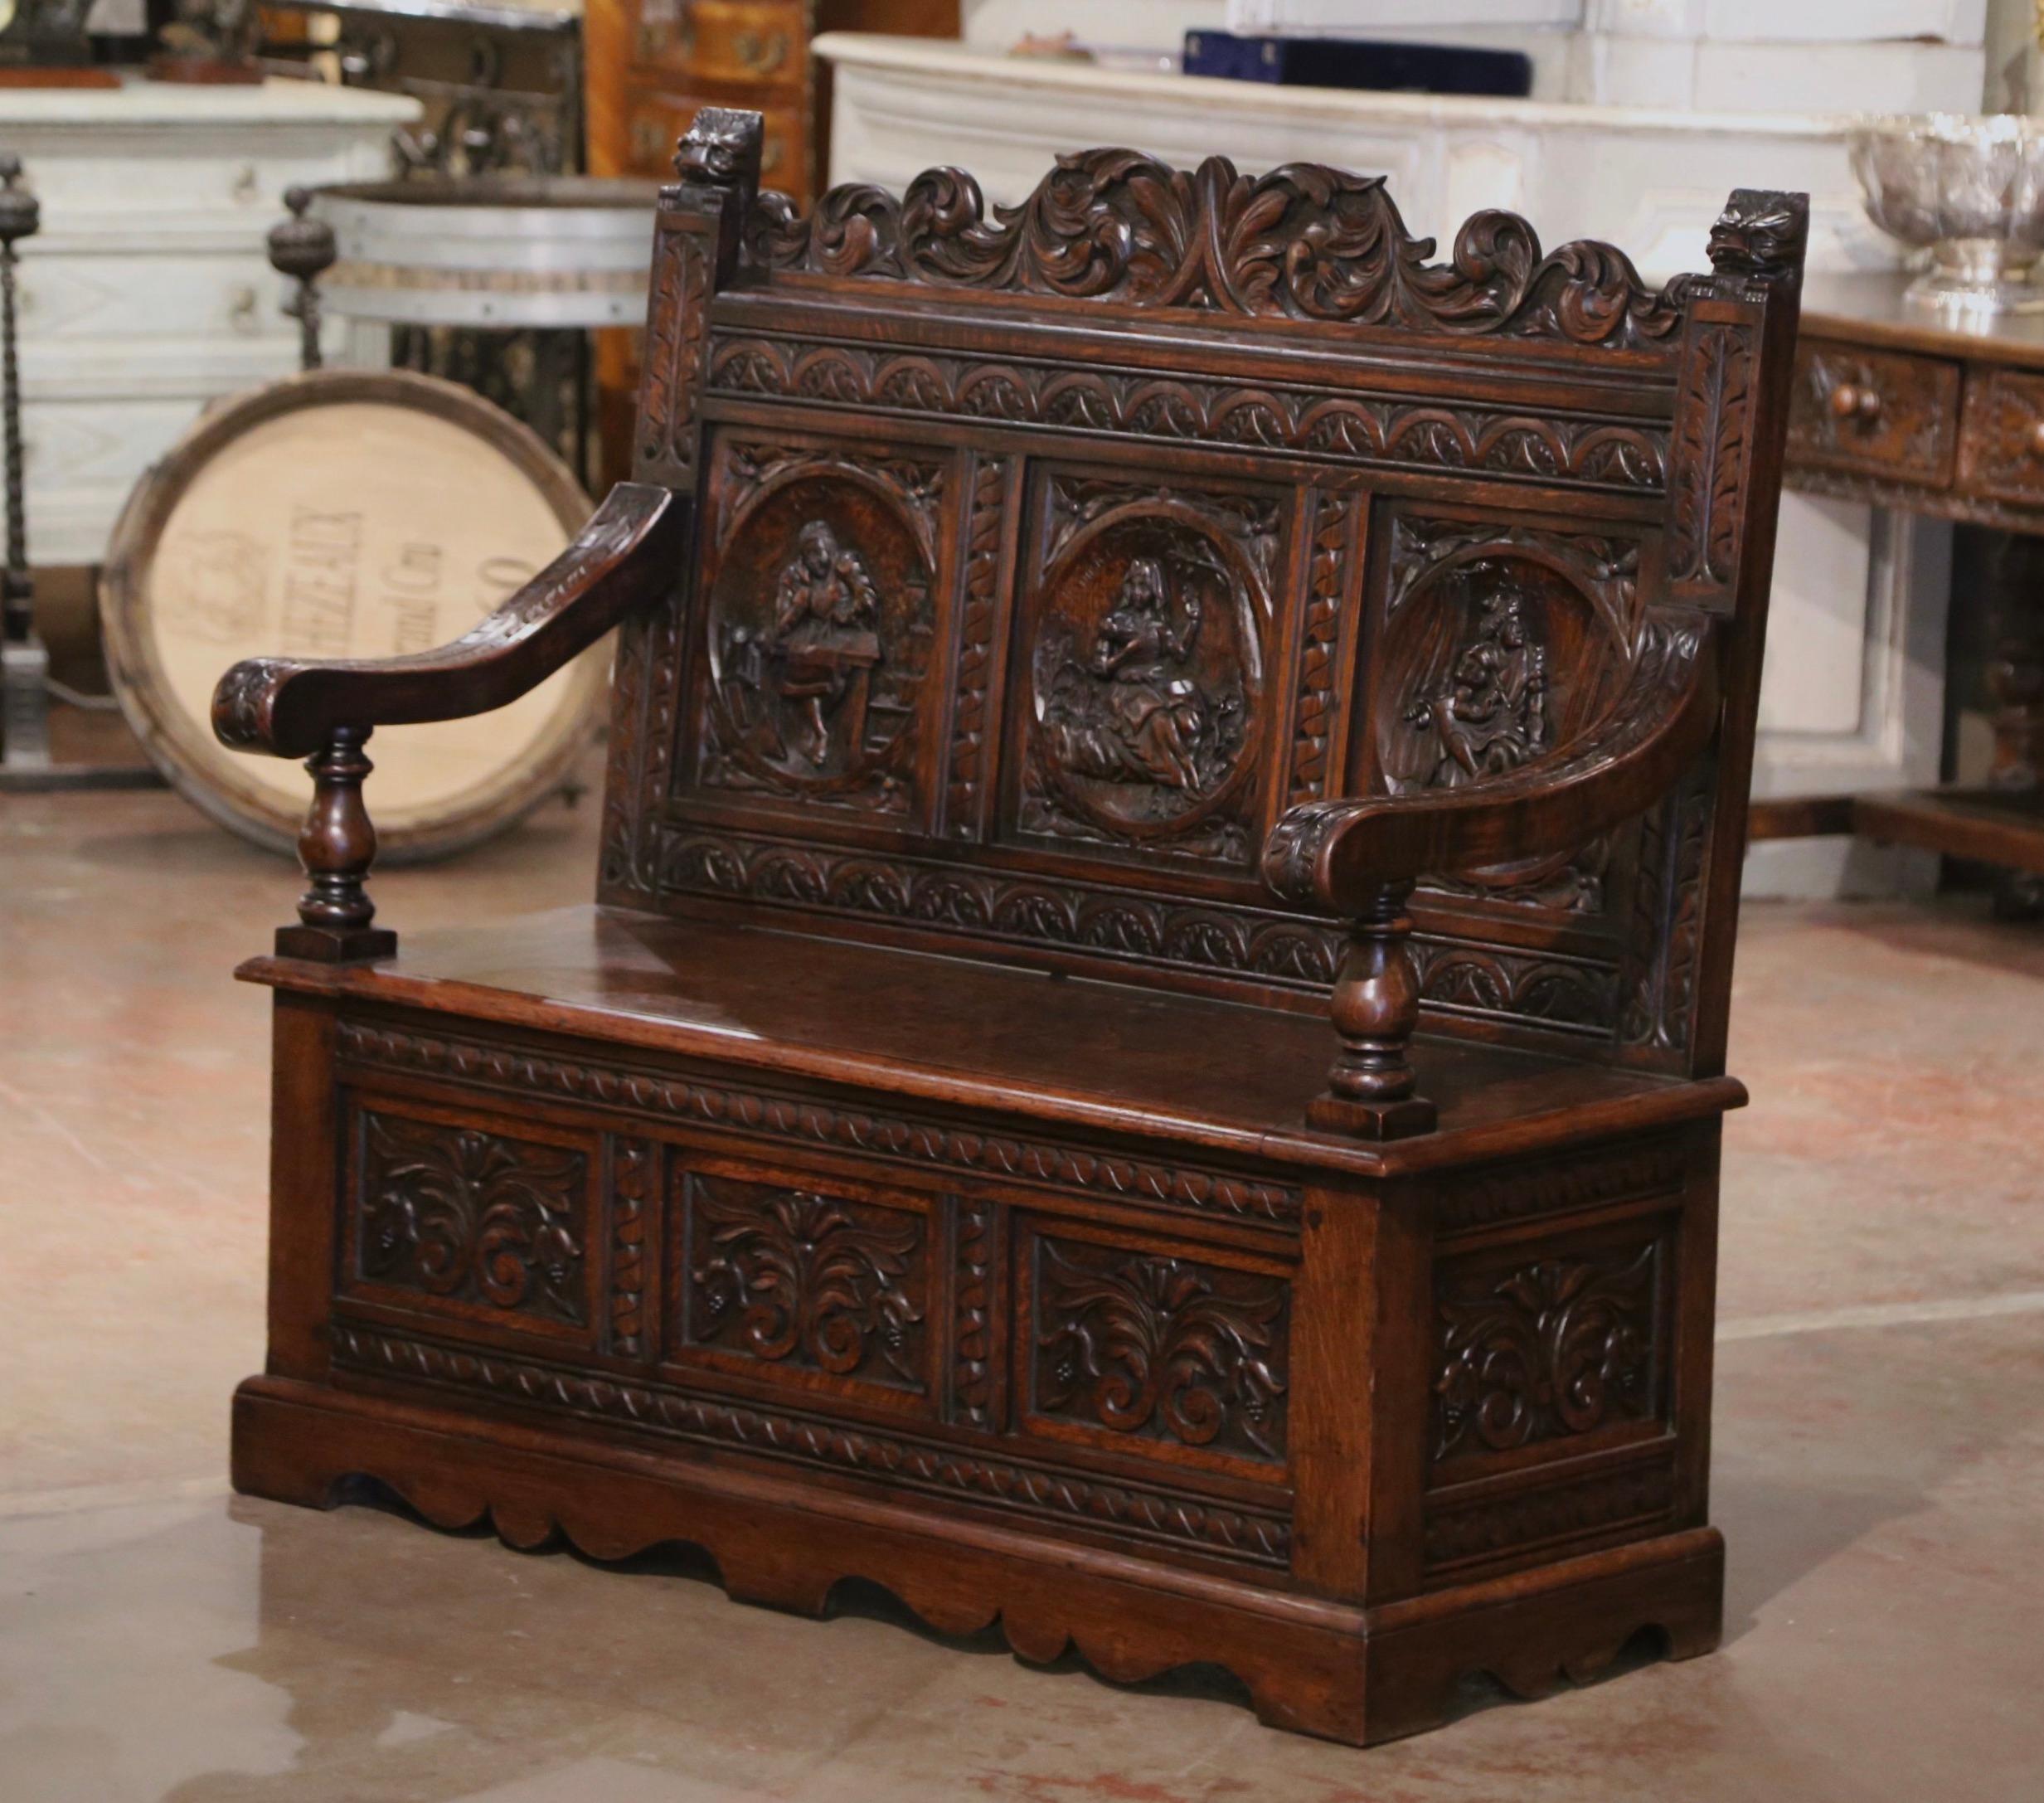 Compliment your entryway, hallway or mud room with this heavily carved antique bench. Crafted in northern France, circa 1870, and built of solid oak wood, the Renaissance style bench stands on bracket feet over a carved scalloped apron. The elegant